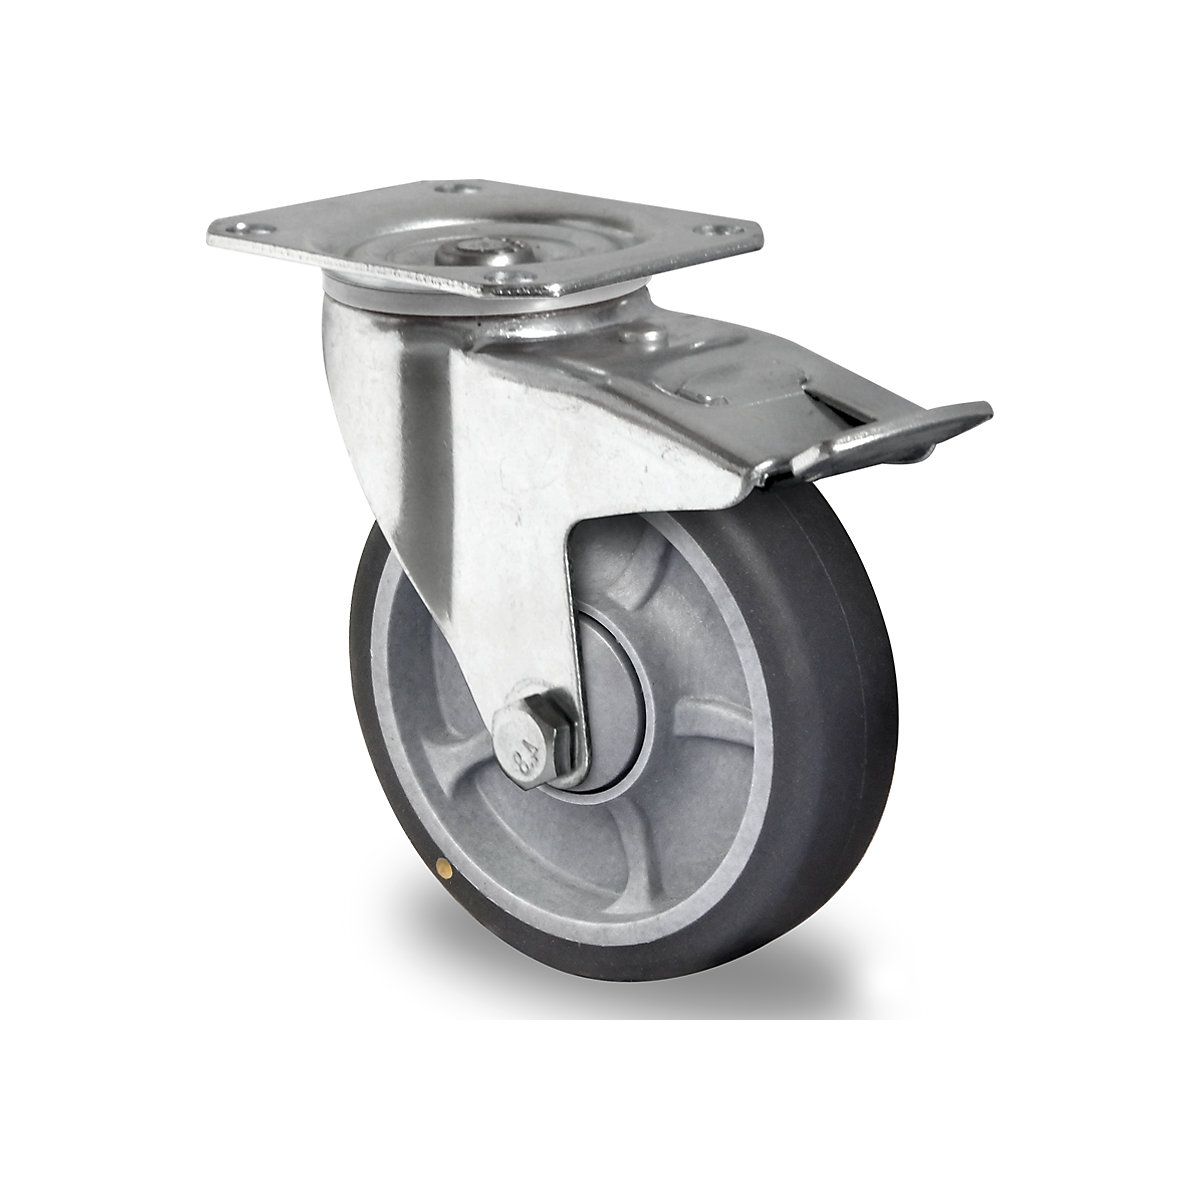 TPE tyres on PP rim, ESD, 2+ items, wheel Ø x width 200 x 40 mm, swivel castor with double stop-2